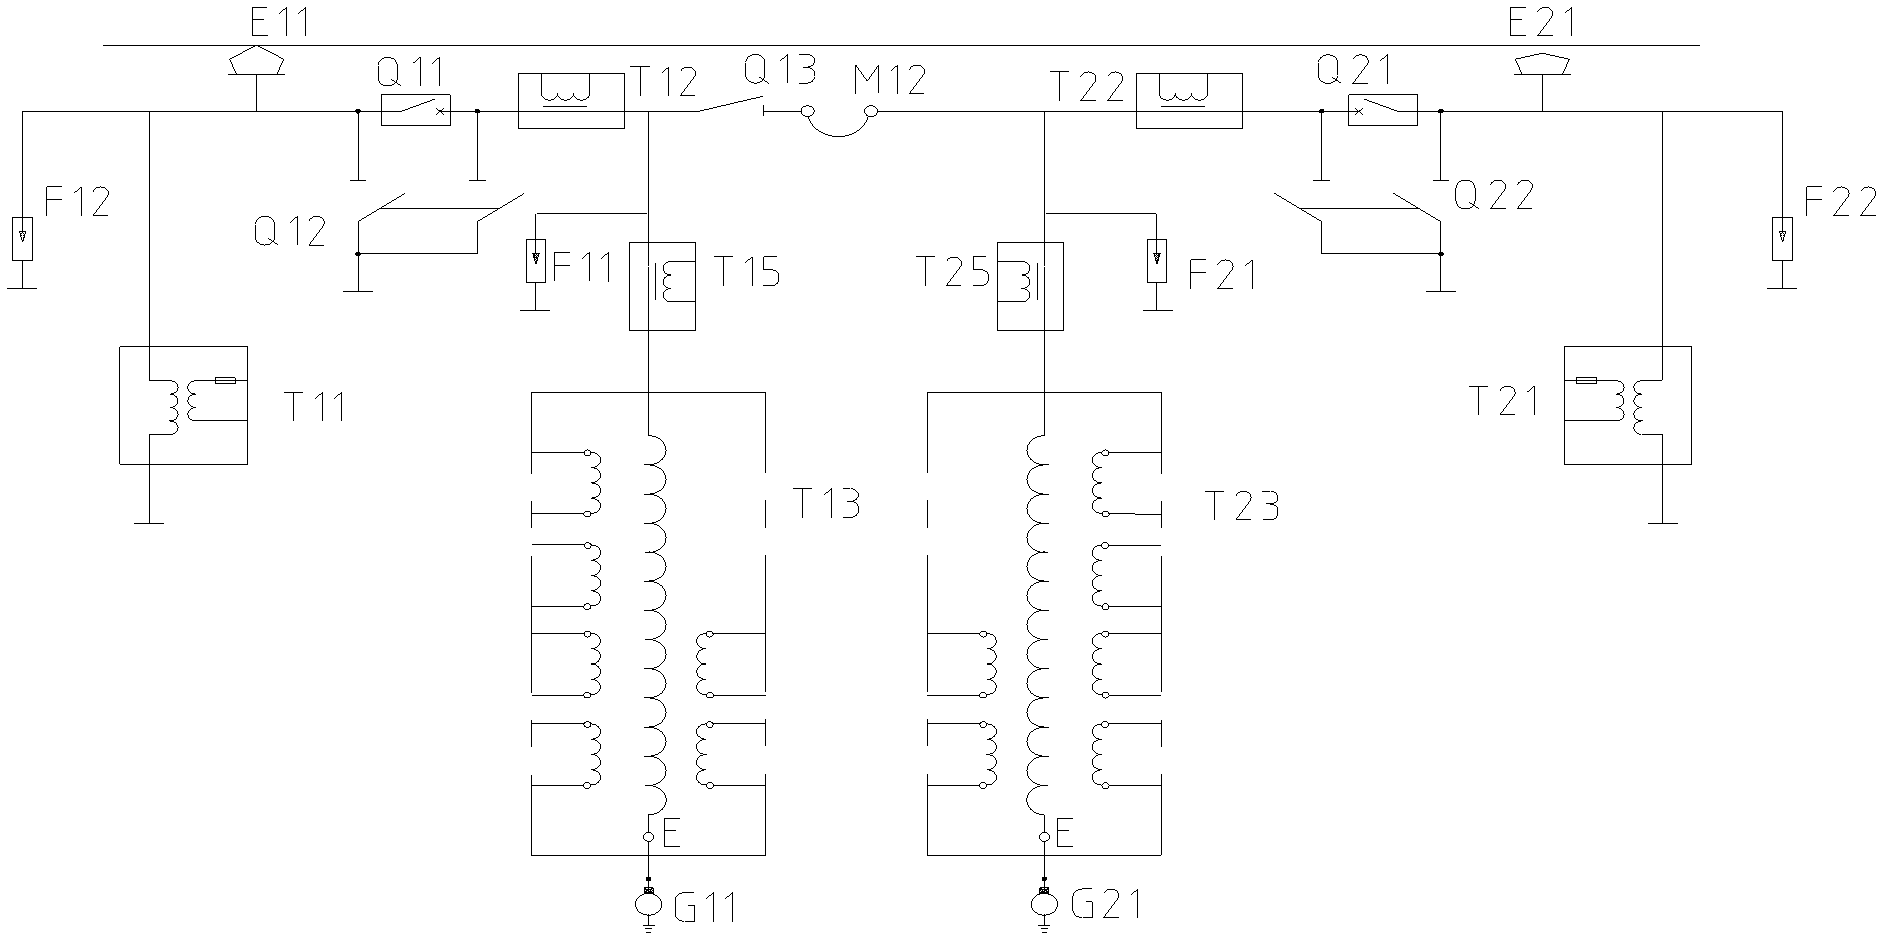 Network-side circuit of electric locomotive unit